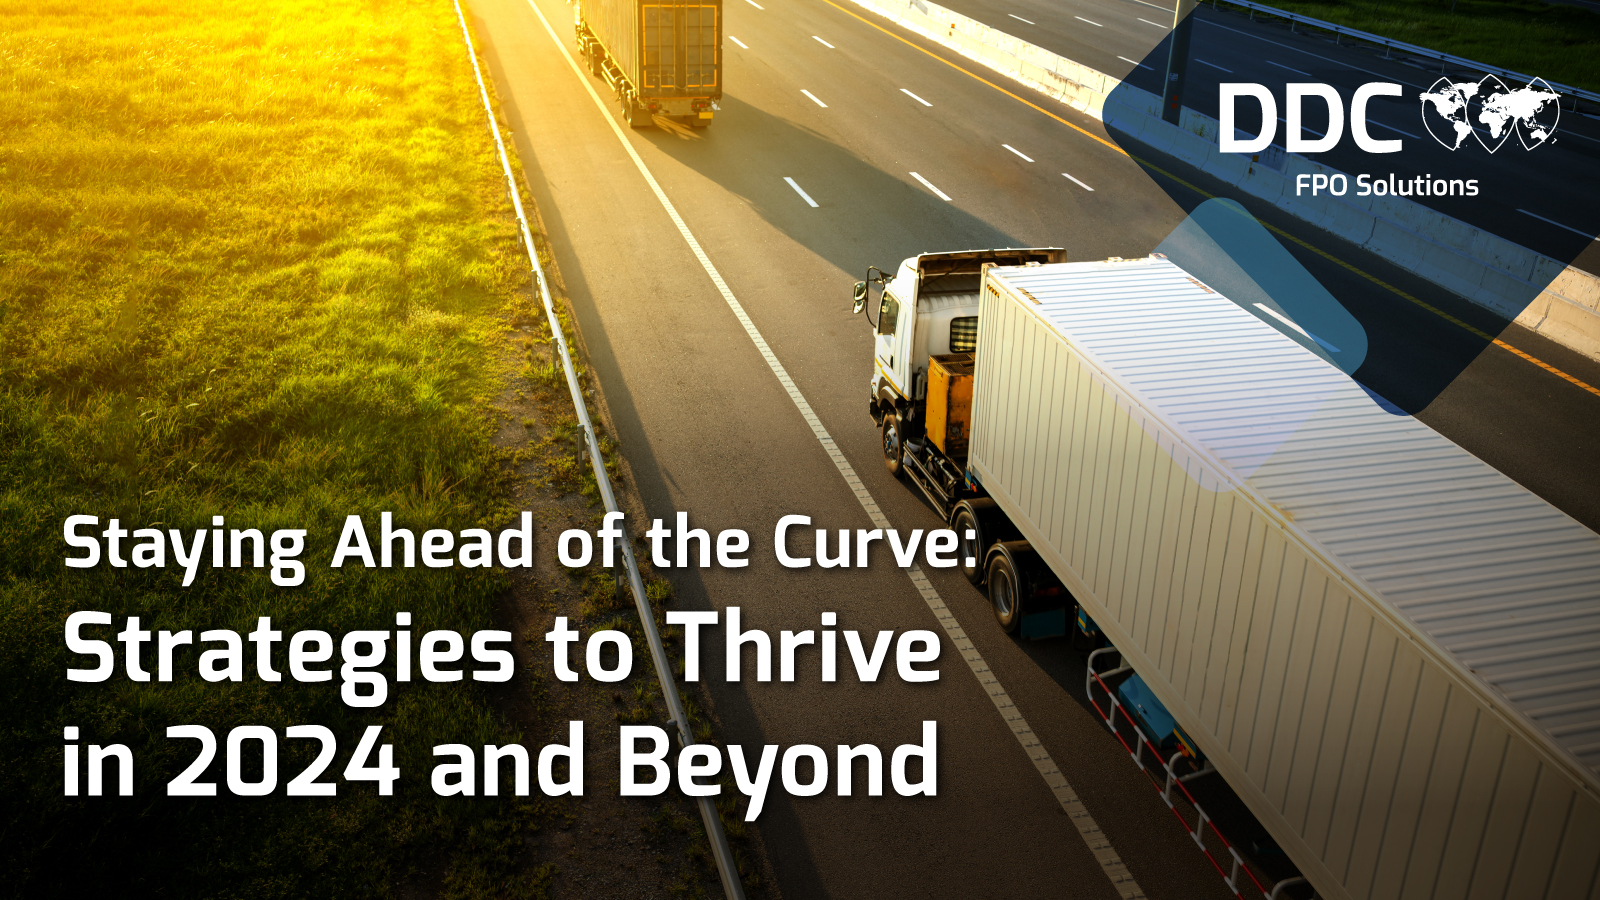 Staying Ahead of the Curve: Strategies to Thrive in 2024 and Beyond